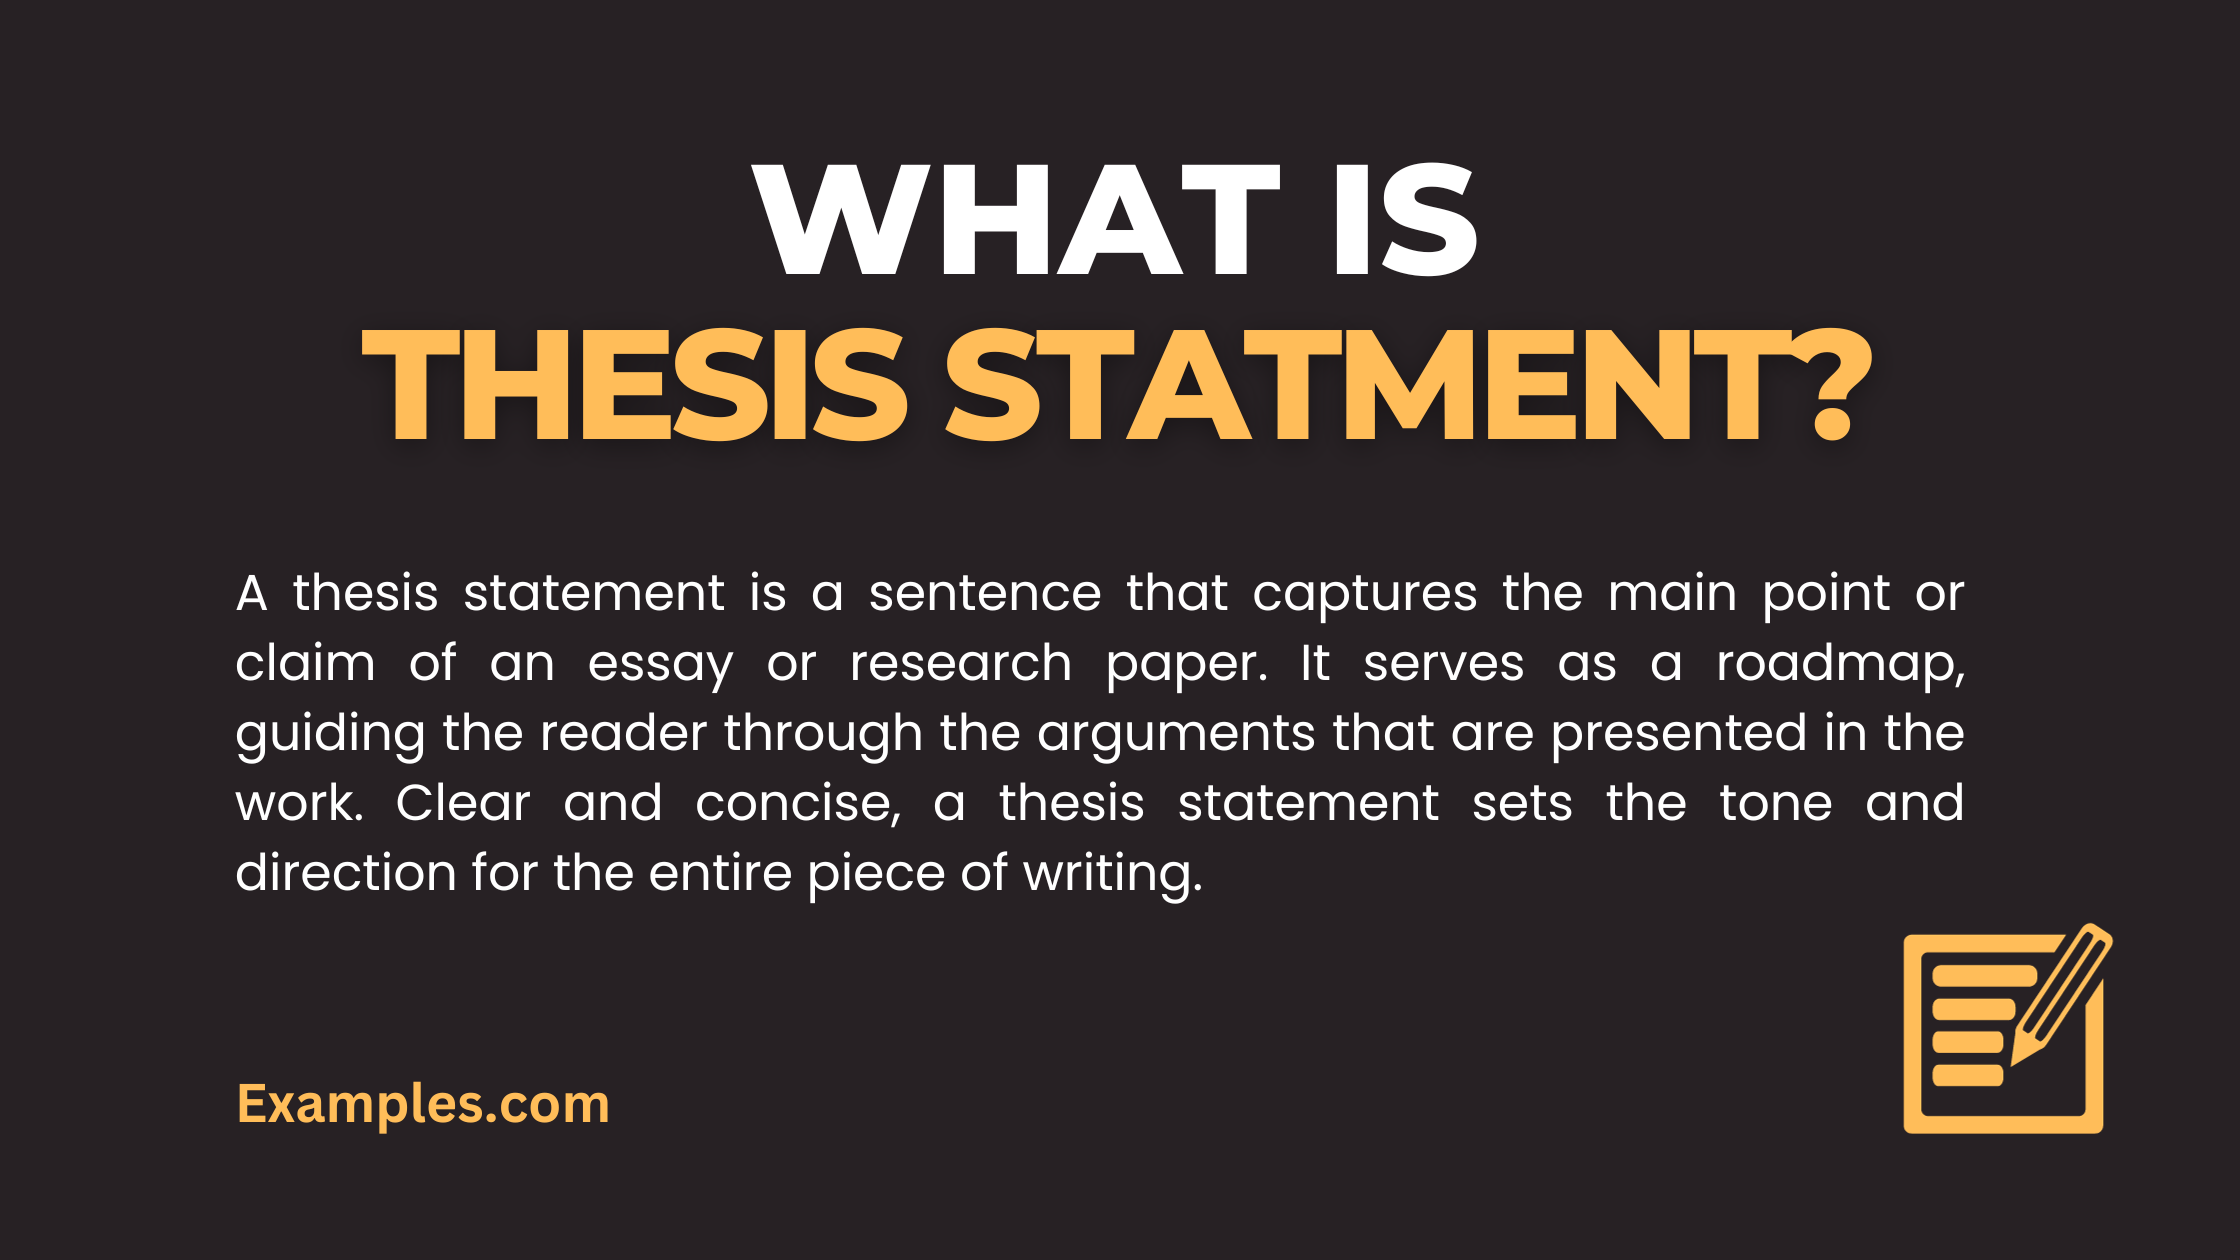 What is Thesis Statement